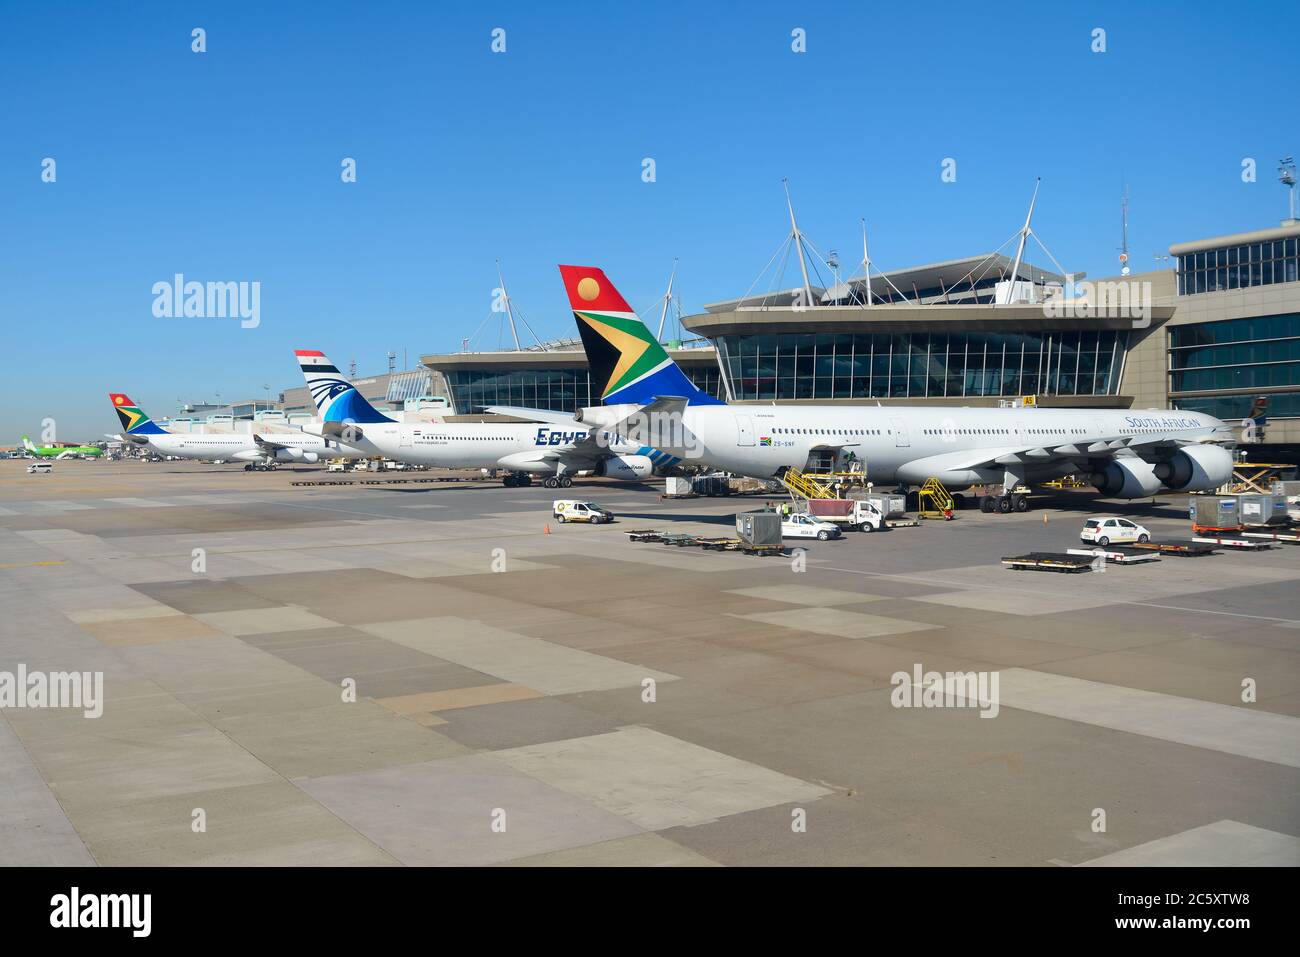 South African Airways and Egyptair aircraft parked at Johannesburg O R Tambo International Airport passengers terminal. Air travel in South Africa. Stock Photo